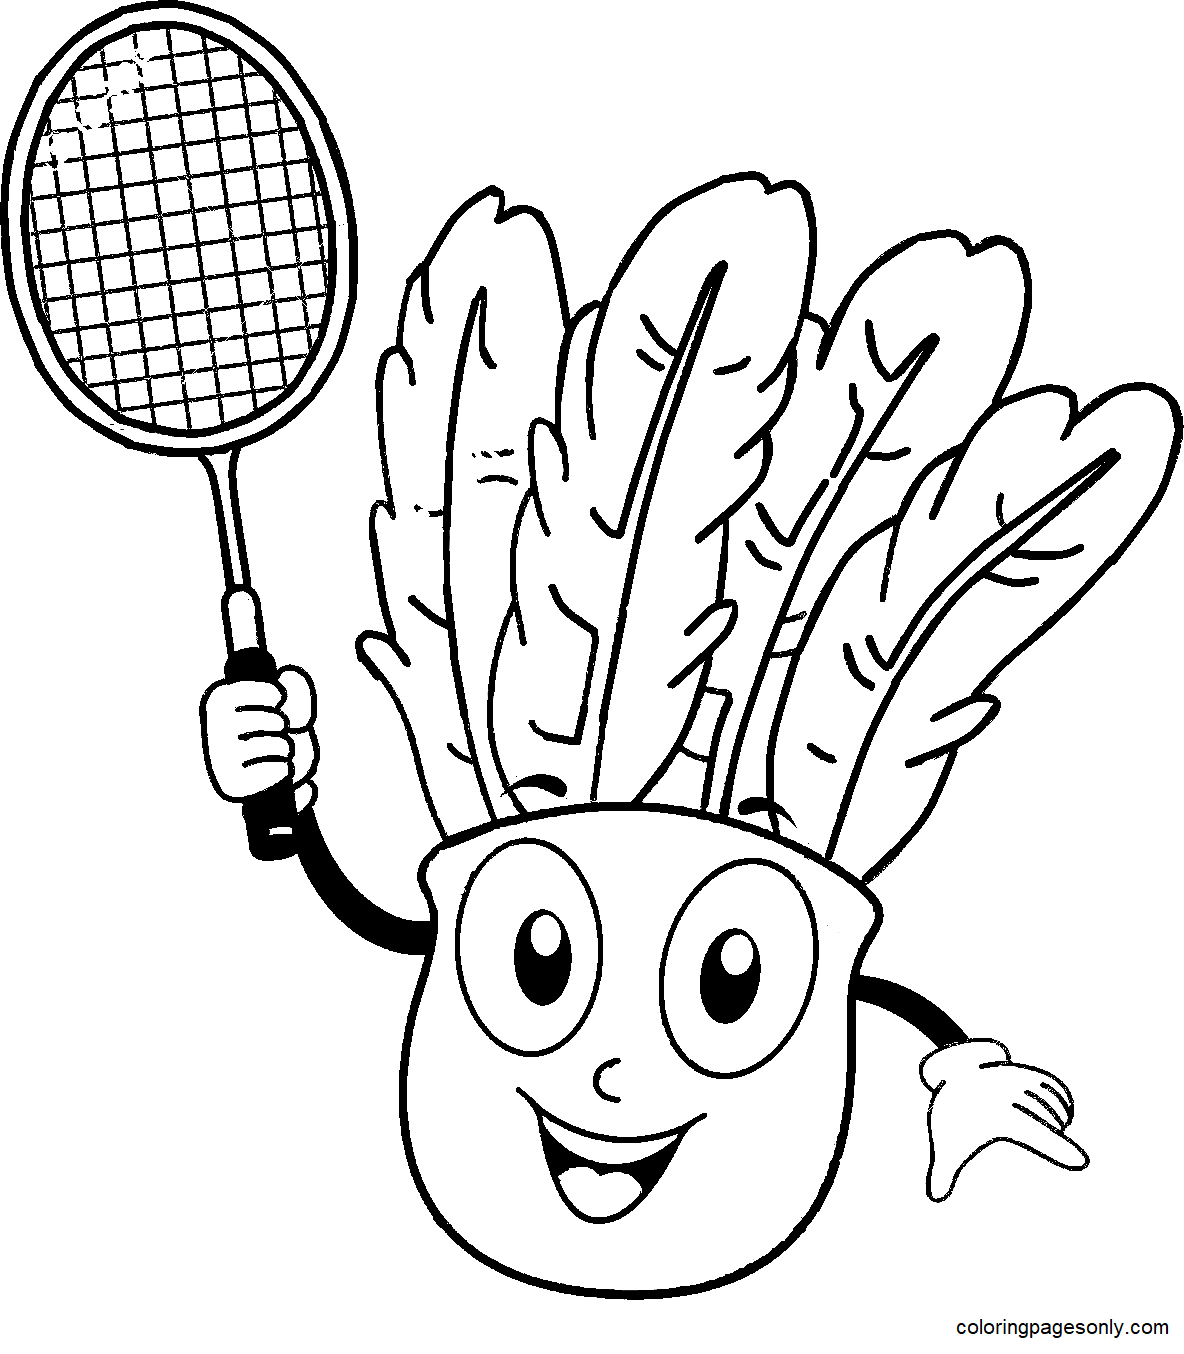 Shuttlecock Mascot holding a Badminton Racket Coloring Pages